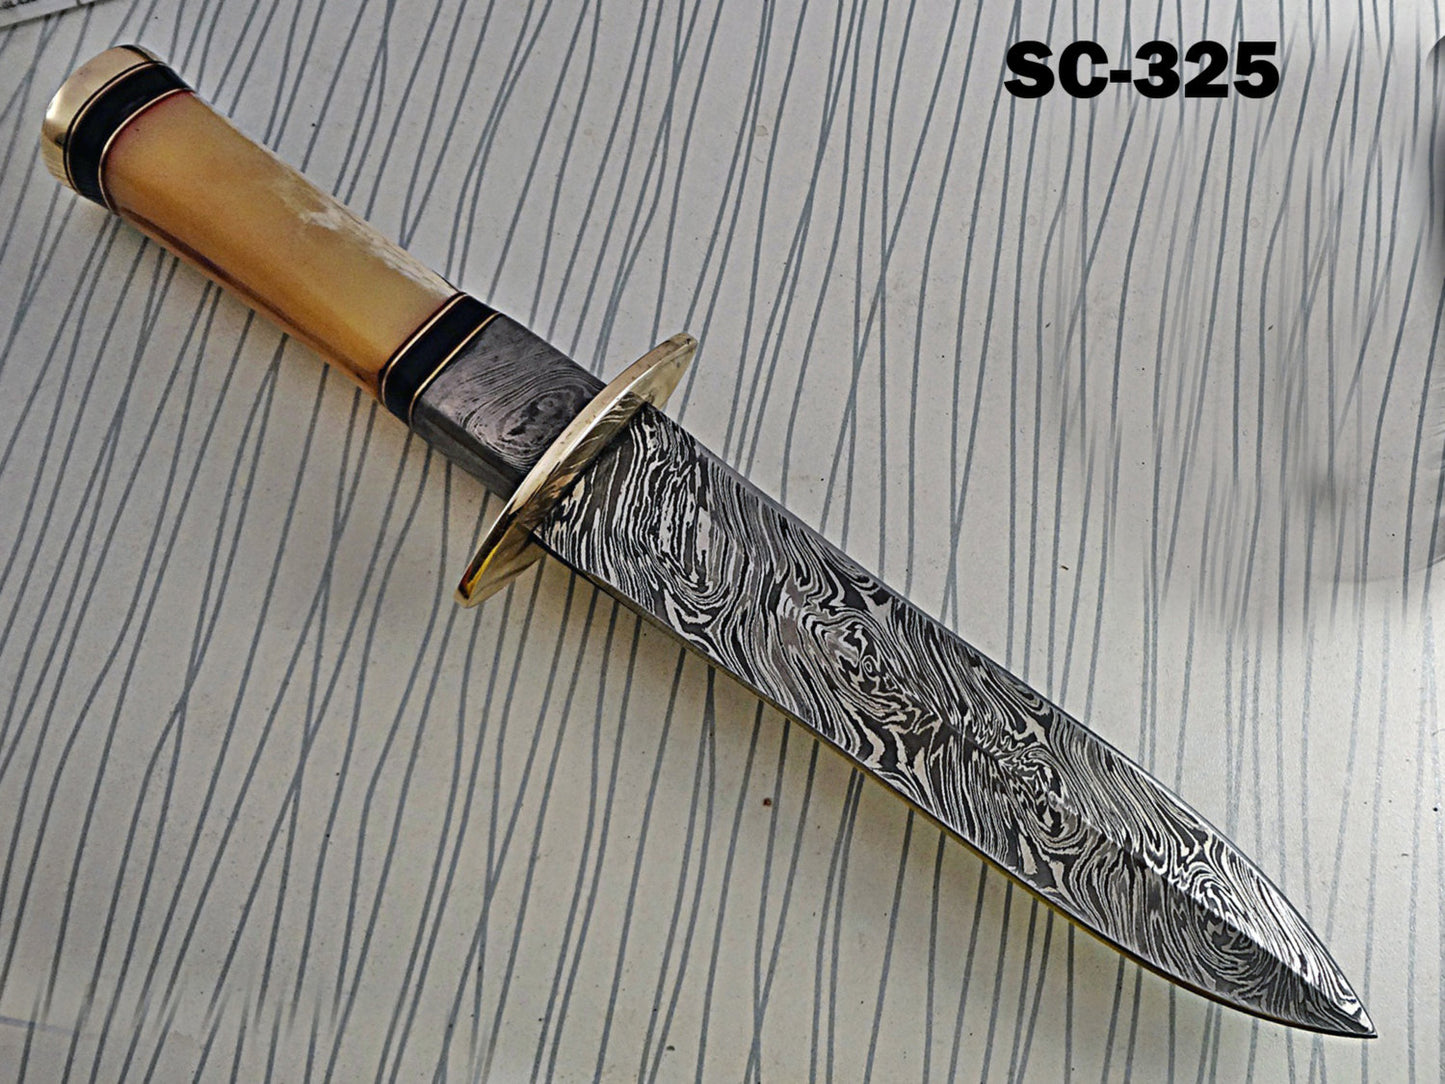 13 Inches long Damascus steel custom made hunting dagger Knife camel bone, Bull horn & bolster scale Hand Forged cow hide leather sheath